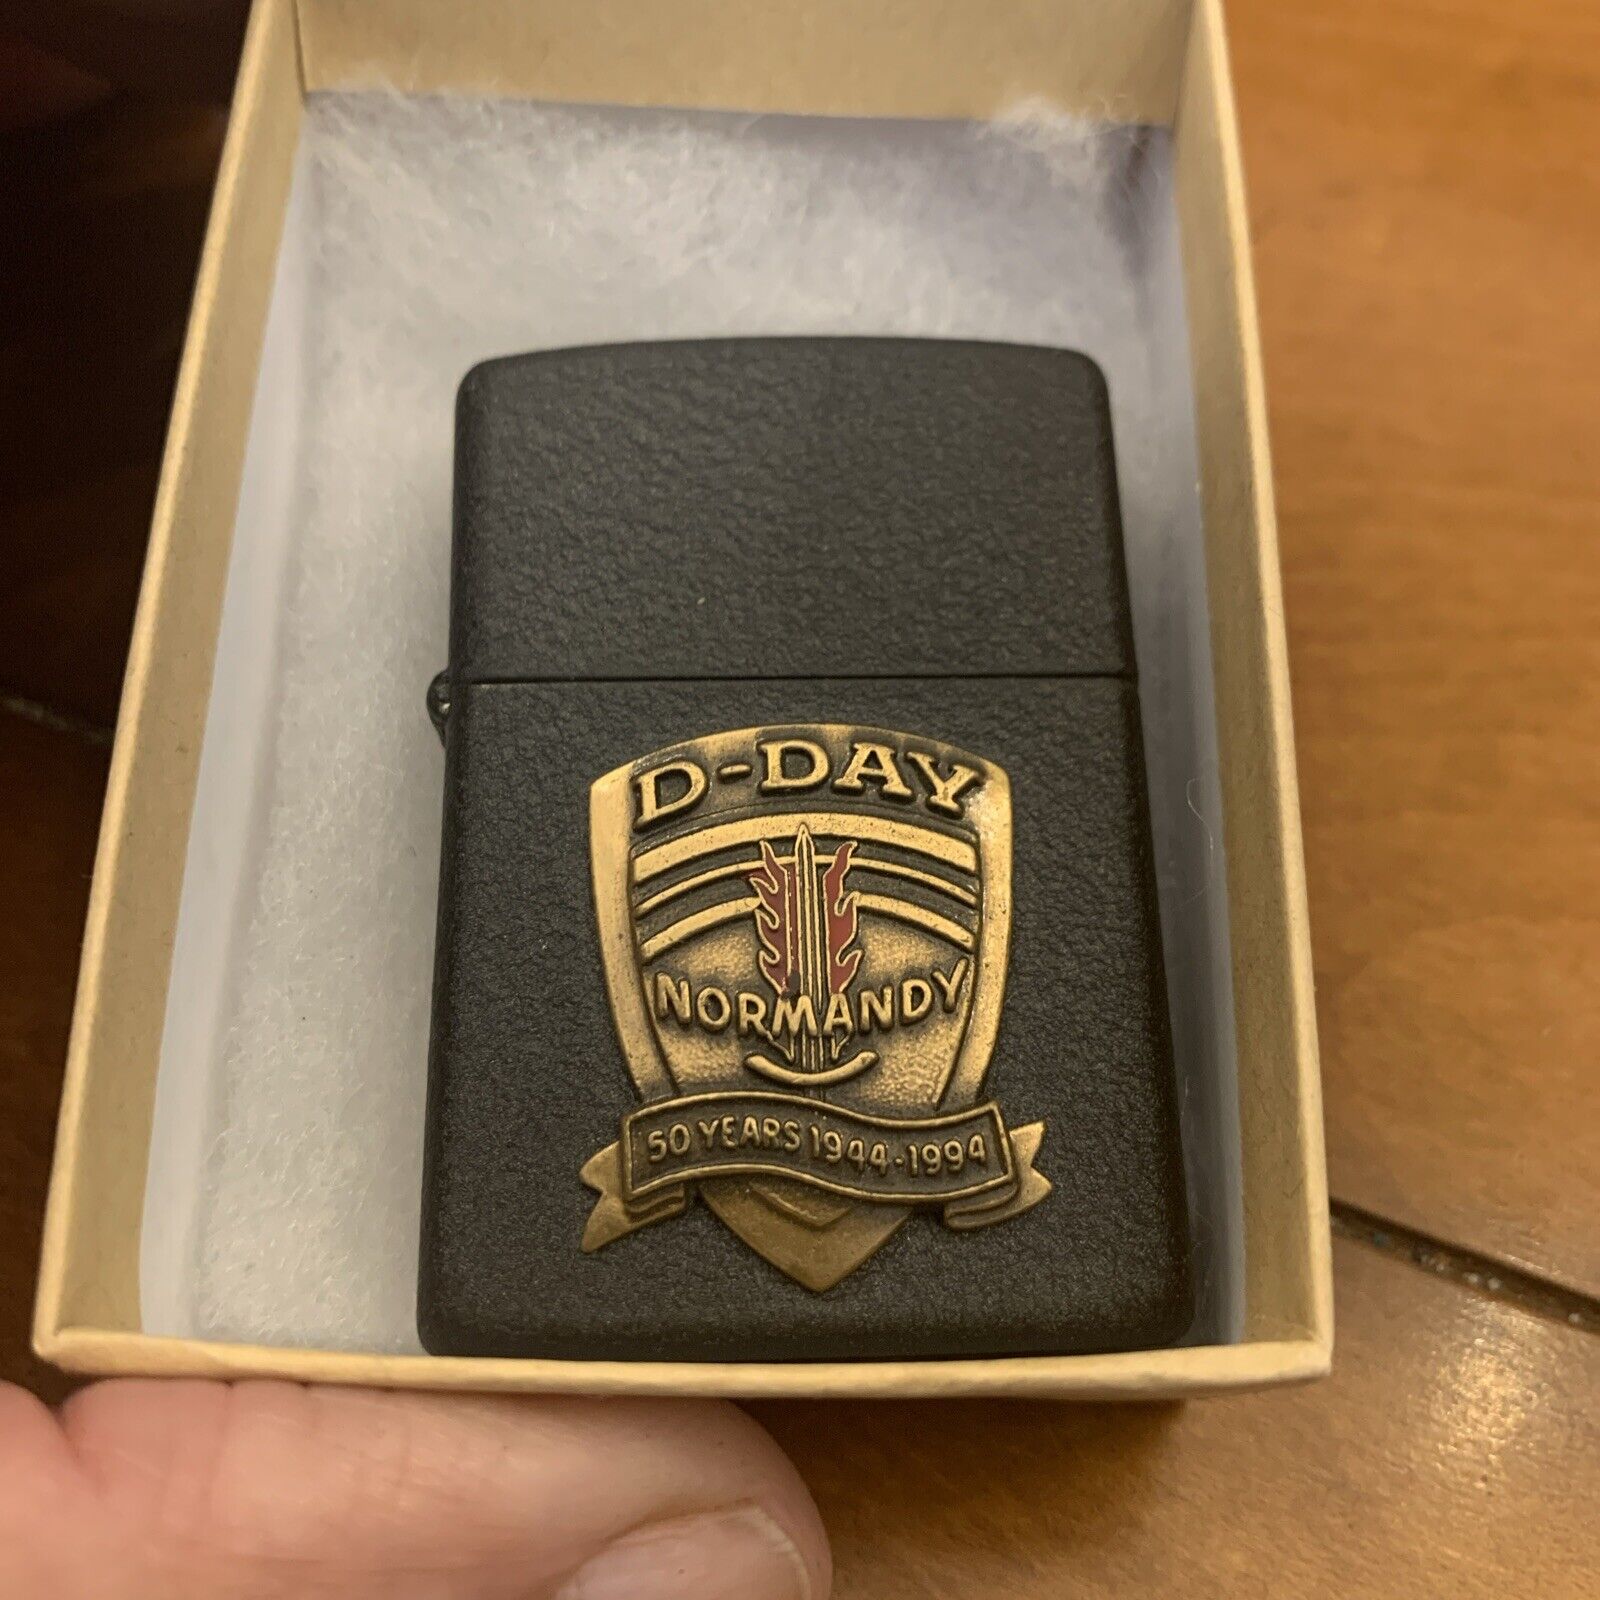 Vintage Zippo D-Day Normandy 50 Year Anniversary Lighter